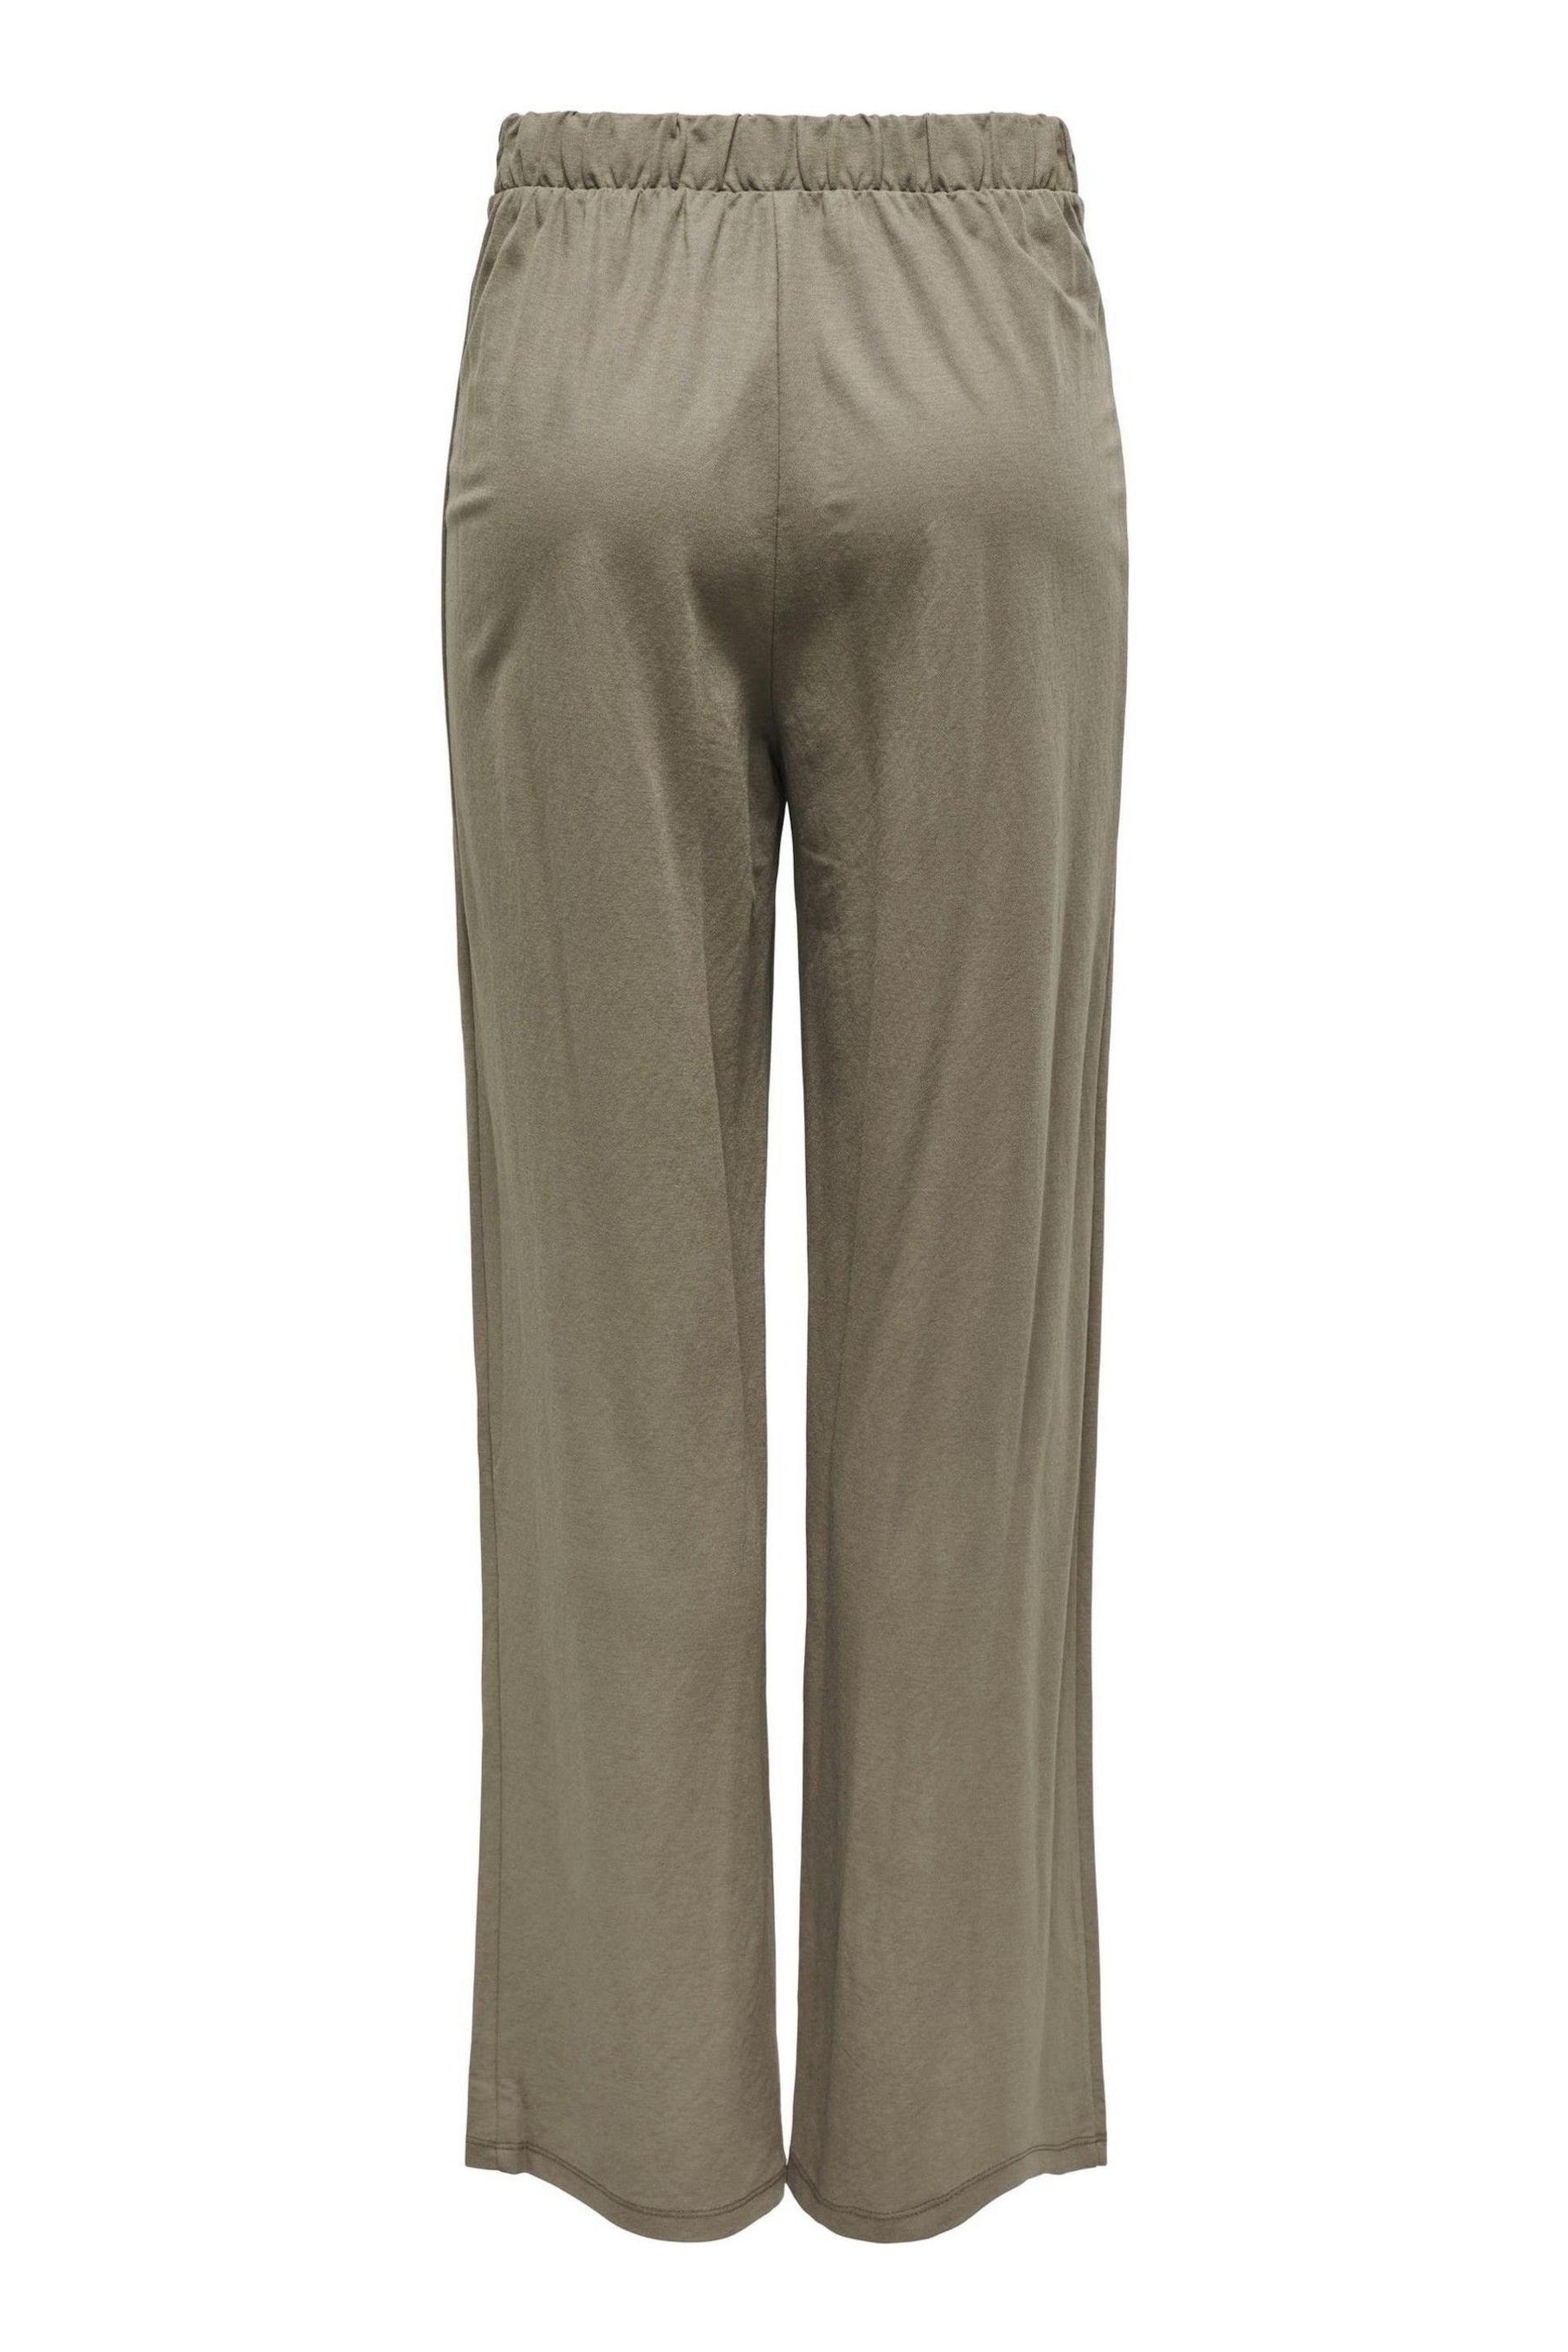 ONLY Brown Jersey Wide Leg Trousers - Image 5 of 5